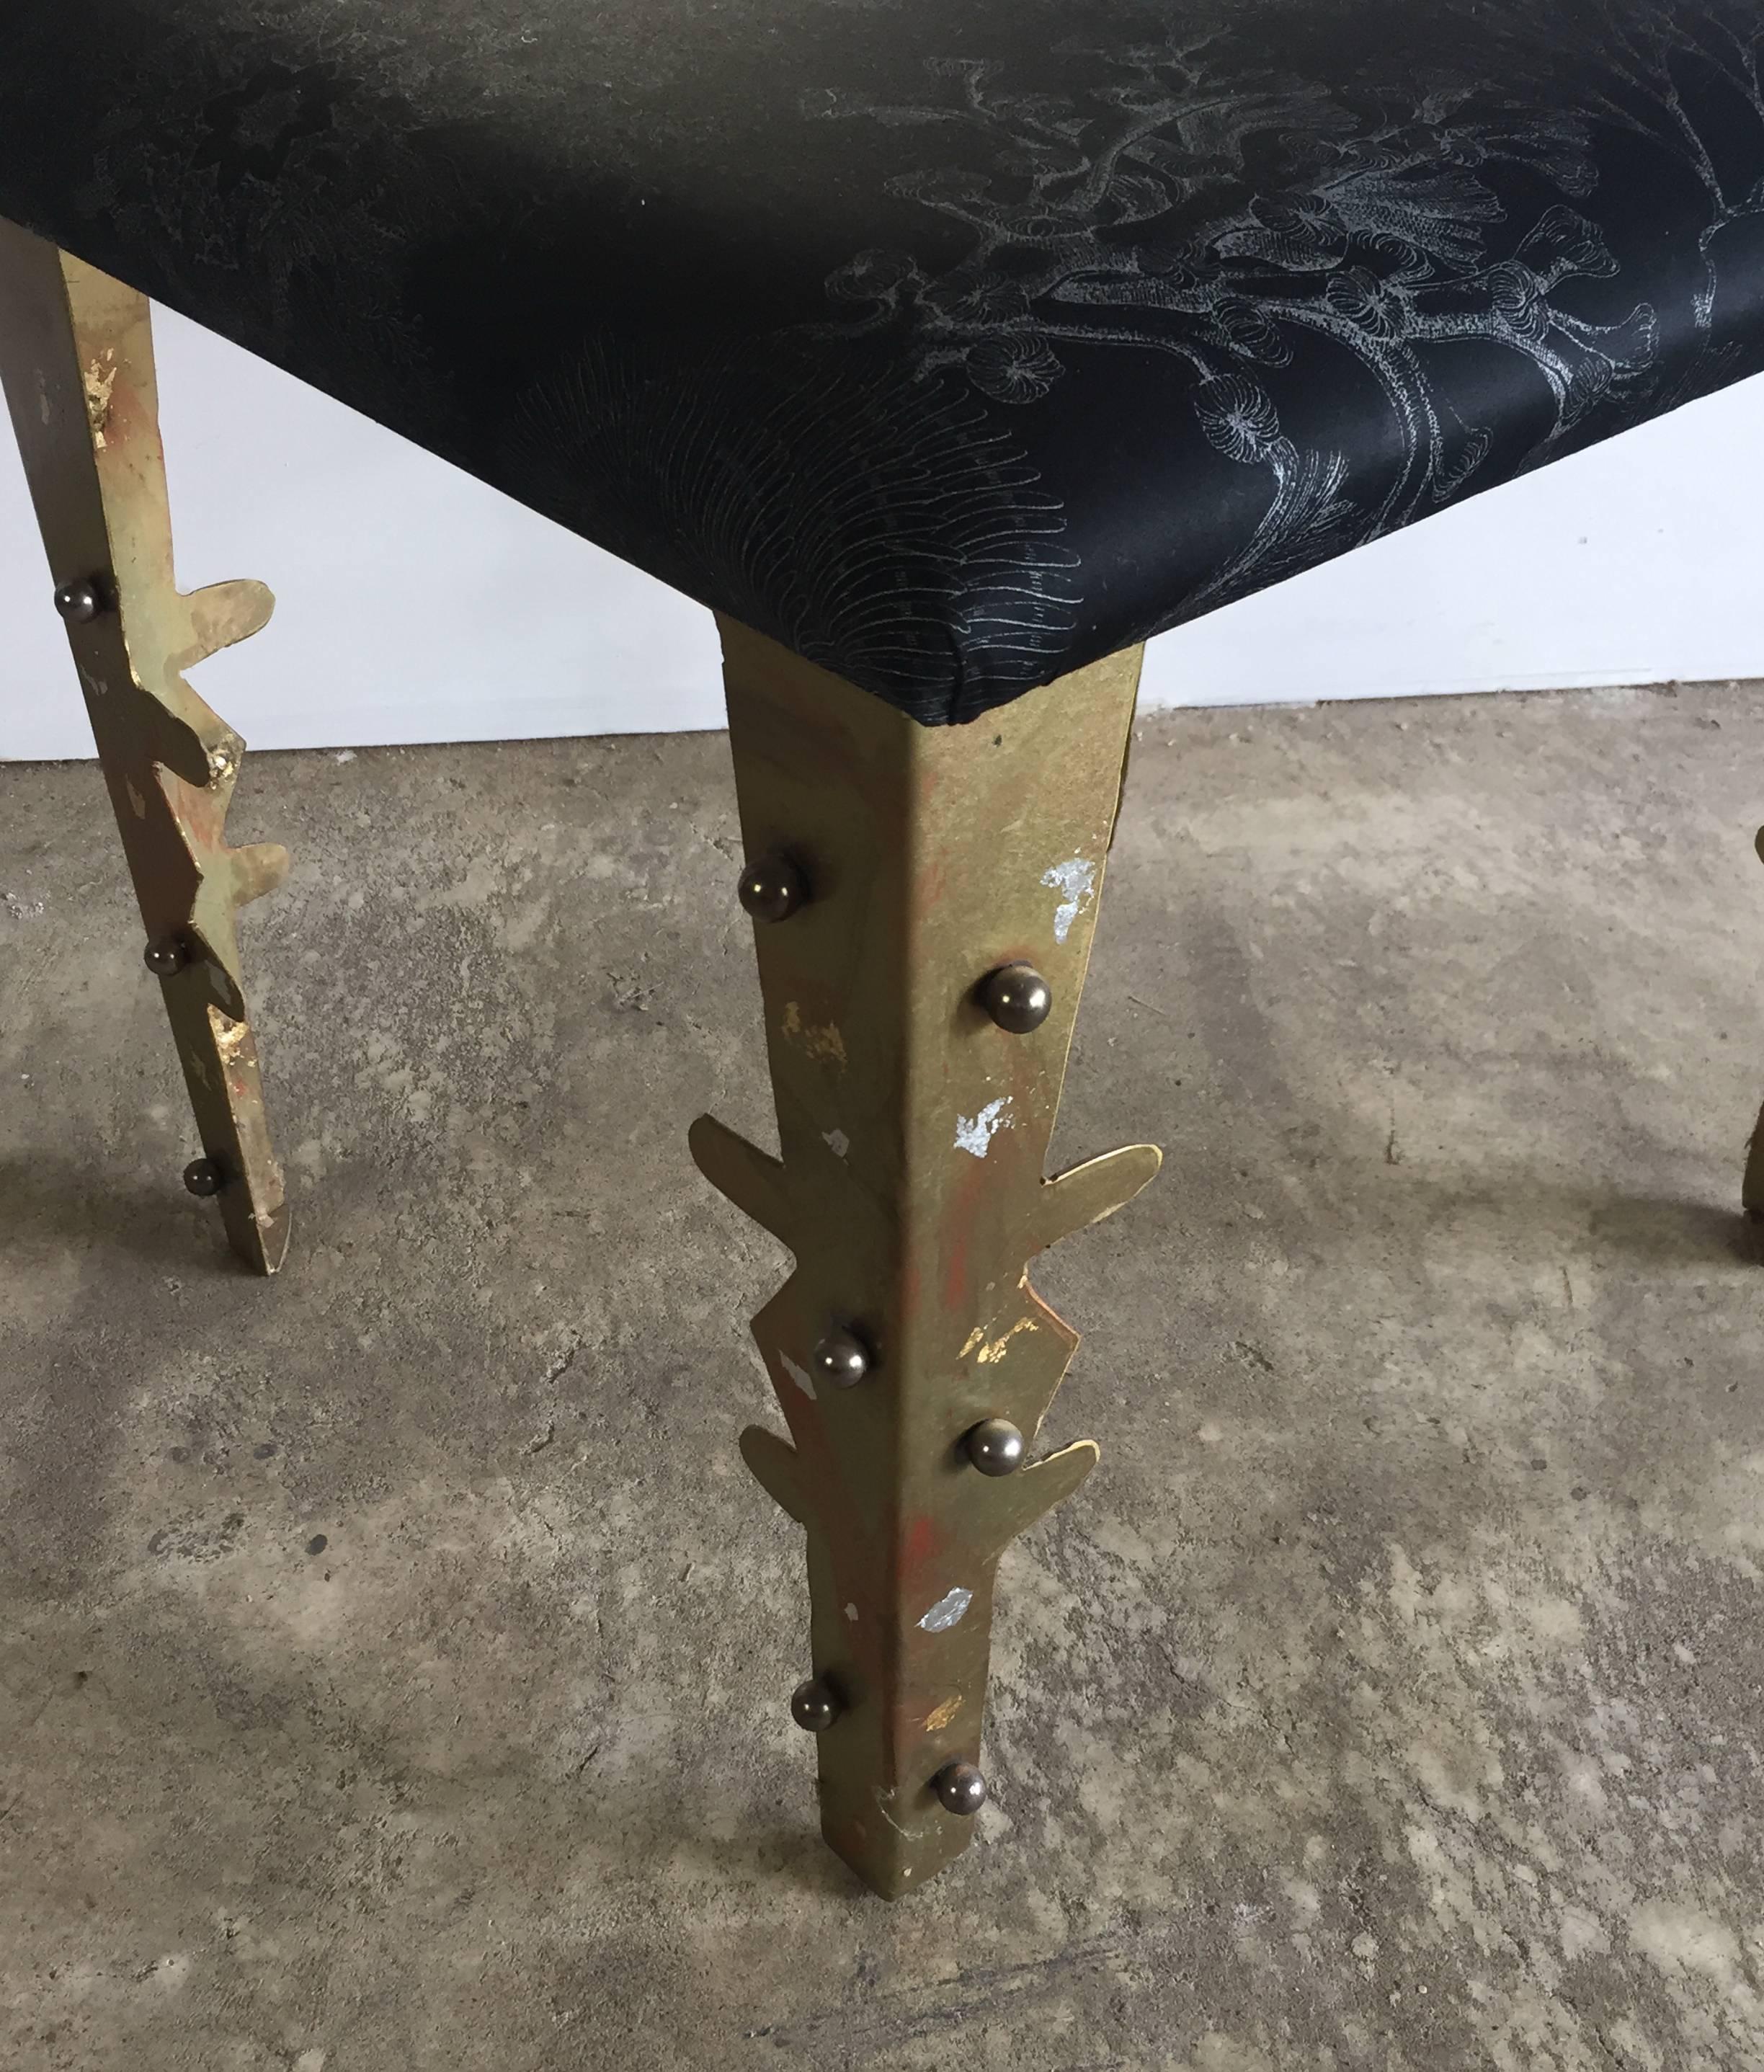 Very stunning brass chair called Nel Profondo del Mare.
 Fornasetti fabric seat.
Valerio Saltarelli Savi was born in 1967. He lives and works in a village near Piacenza.
During his artistic life collaborated with Ettore Sottsass, Franz West,